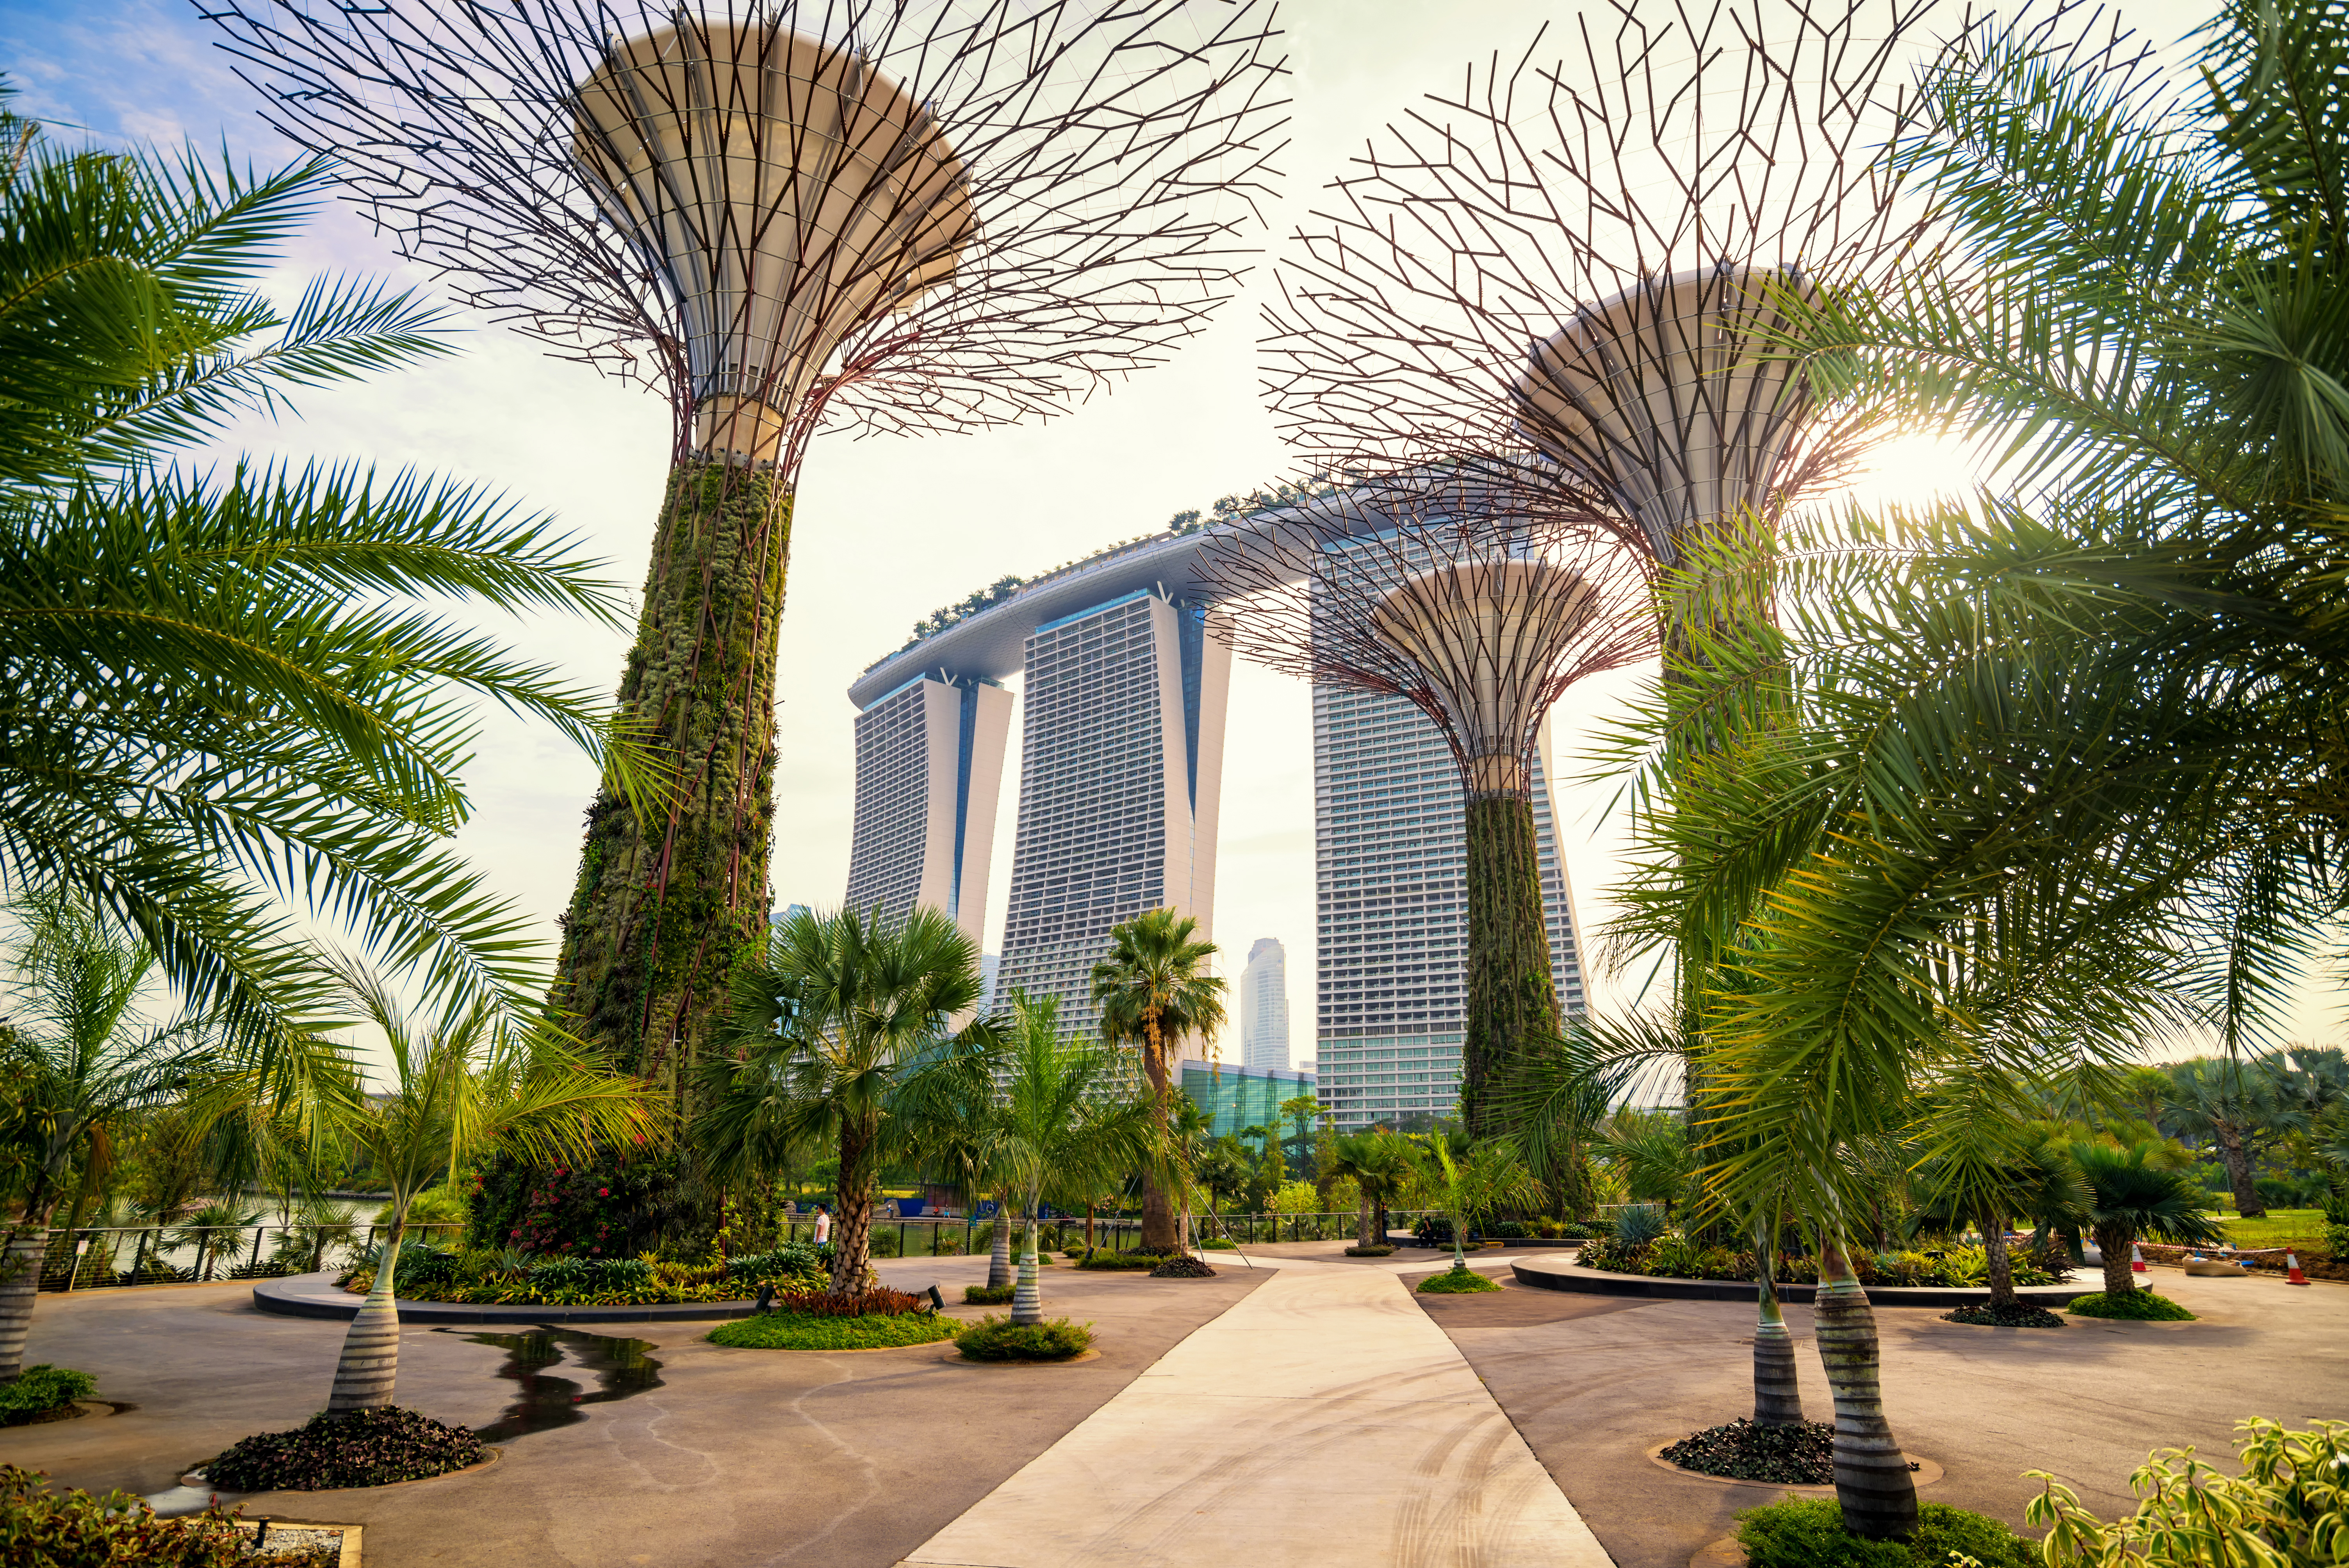 The Supertree at Gardens by the Bay and marina bay sand